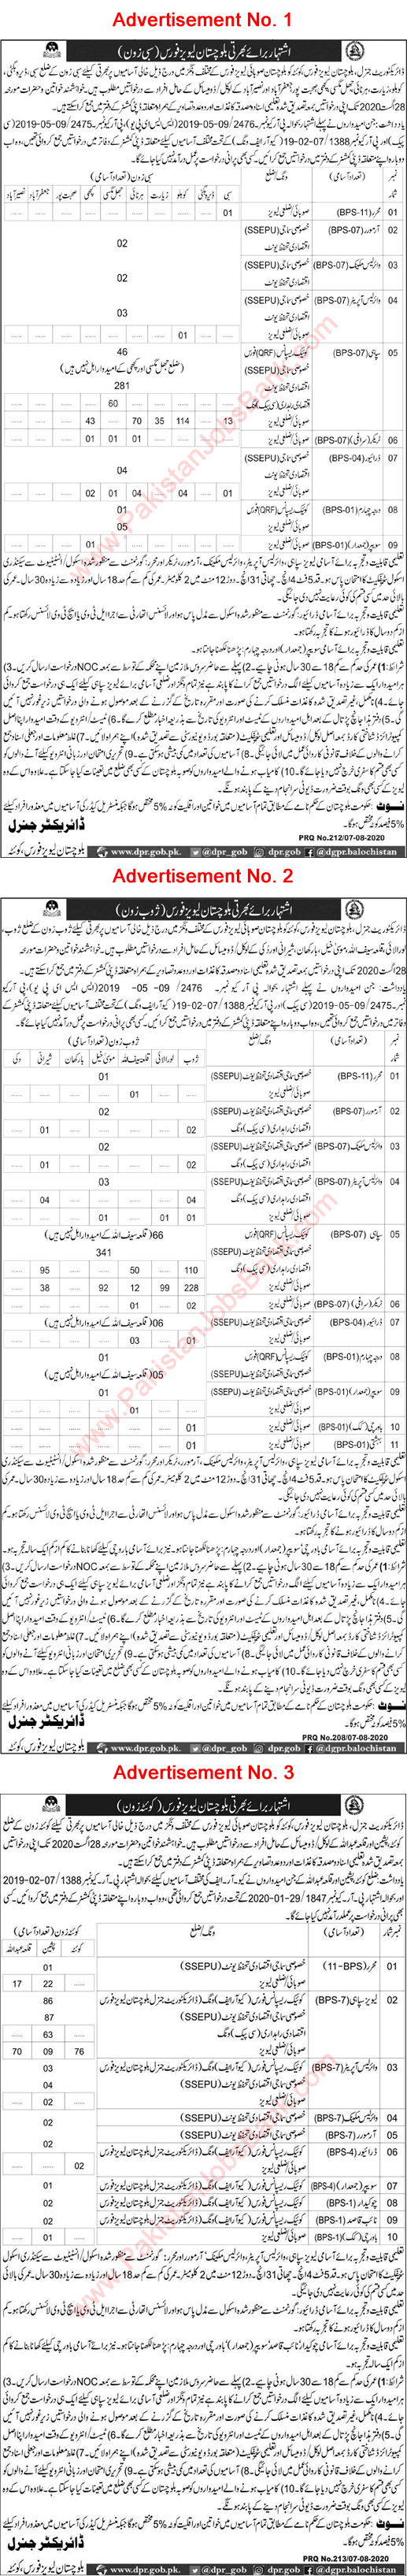 Balochistan Levies Force Jobs August 2020 Sipahi, Drivers, Moharir & Others Latest